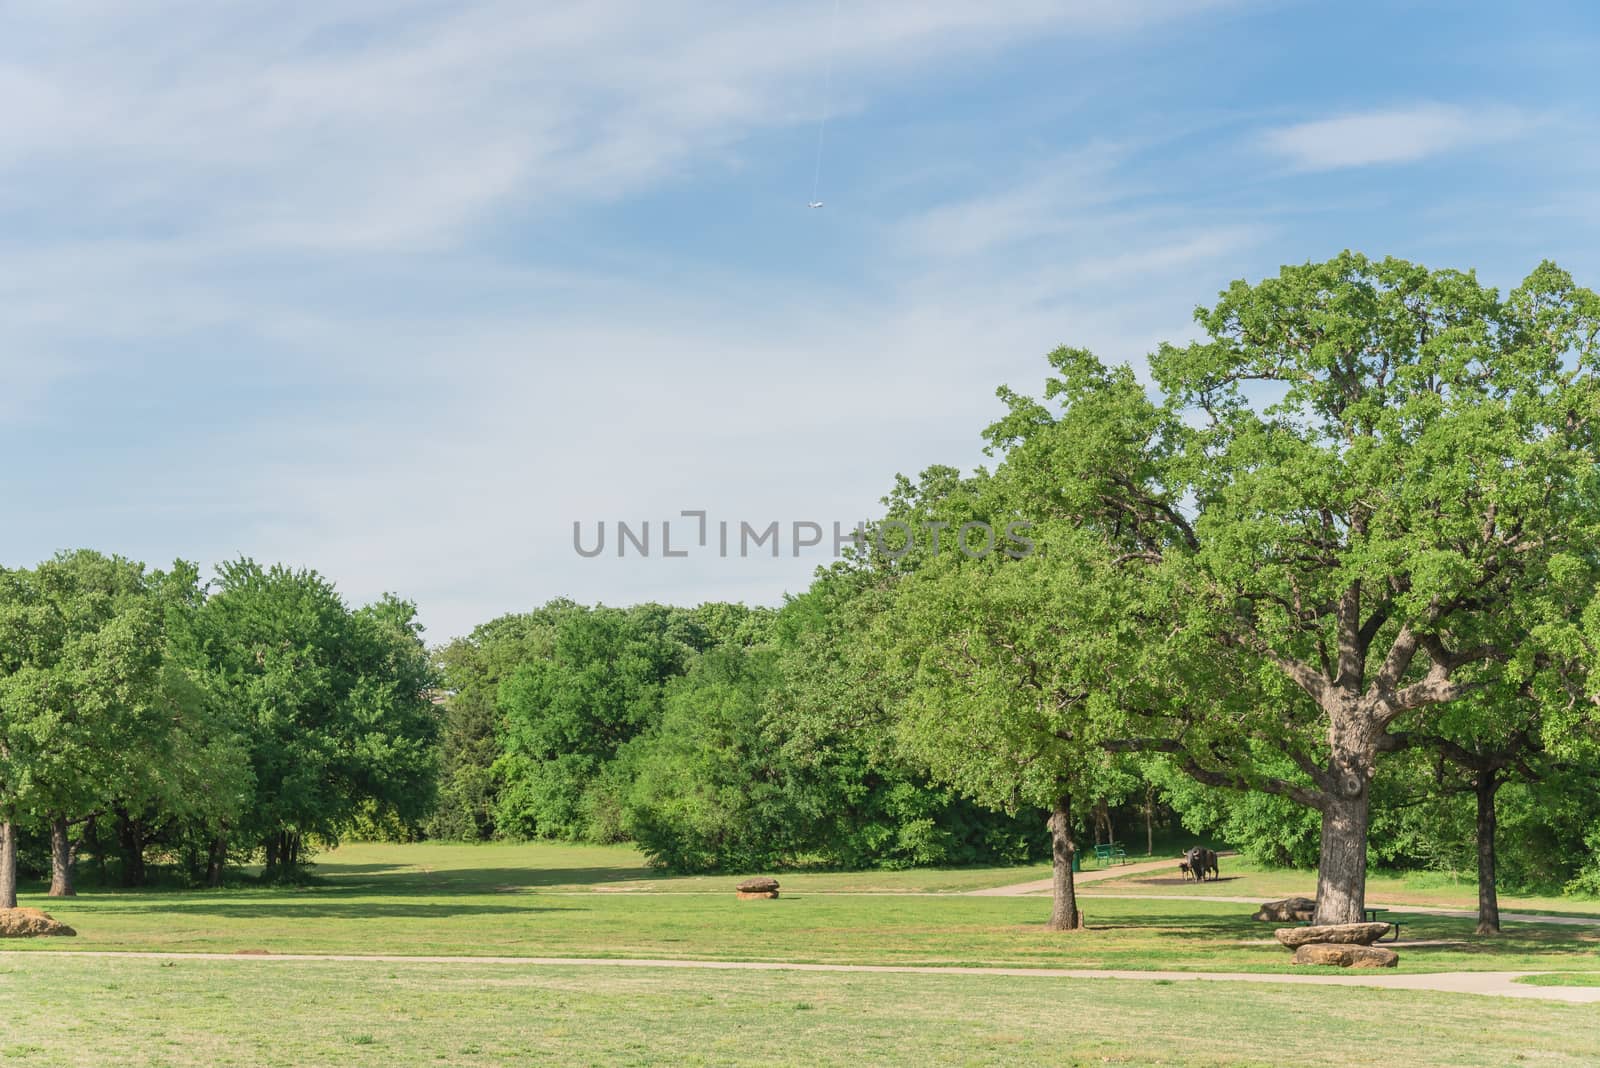 Natural urban park with grass lawn and tree lush in Texas, Ameri by trongnguyen